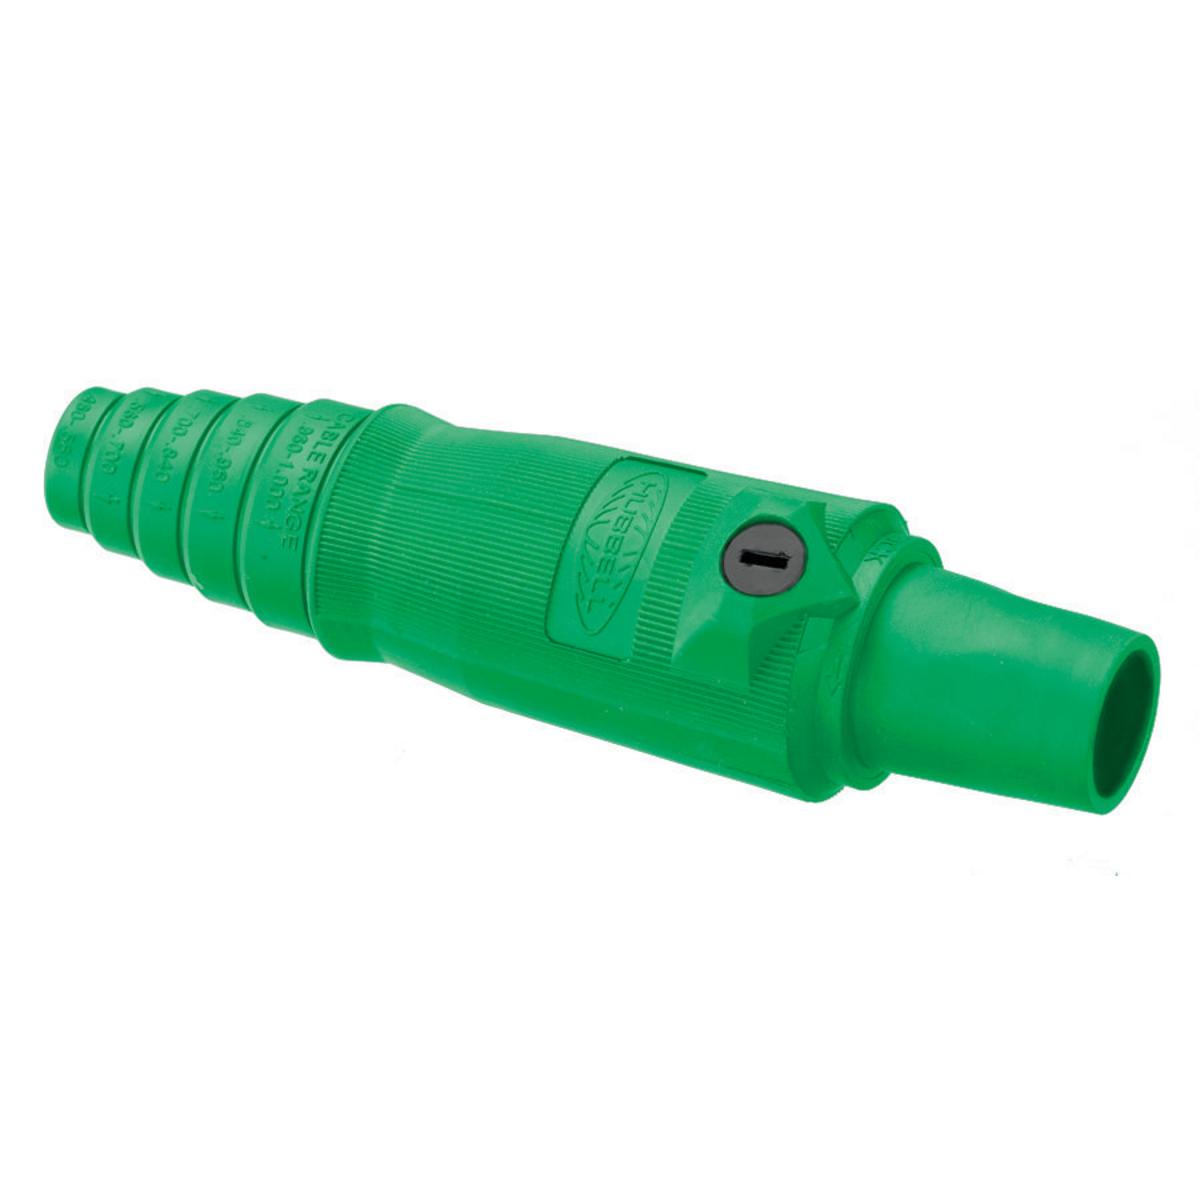 Hubbell HBL400FGN Heavy Duty Products, Single Pole Devices, Industrial Grade, Female, Plug, 400A 600V AC/DC, Single Conductor, Double Set Screws, Green  ; Extra Long non-conductive inner sleeve ; Turn and Lock Symbol aids in the mating of devices ; Easily Identifiable Cabl